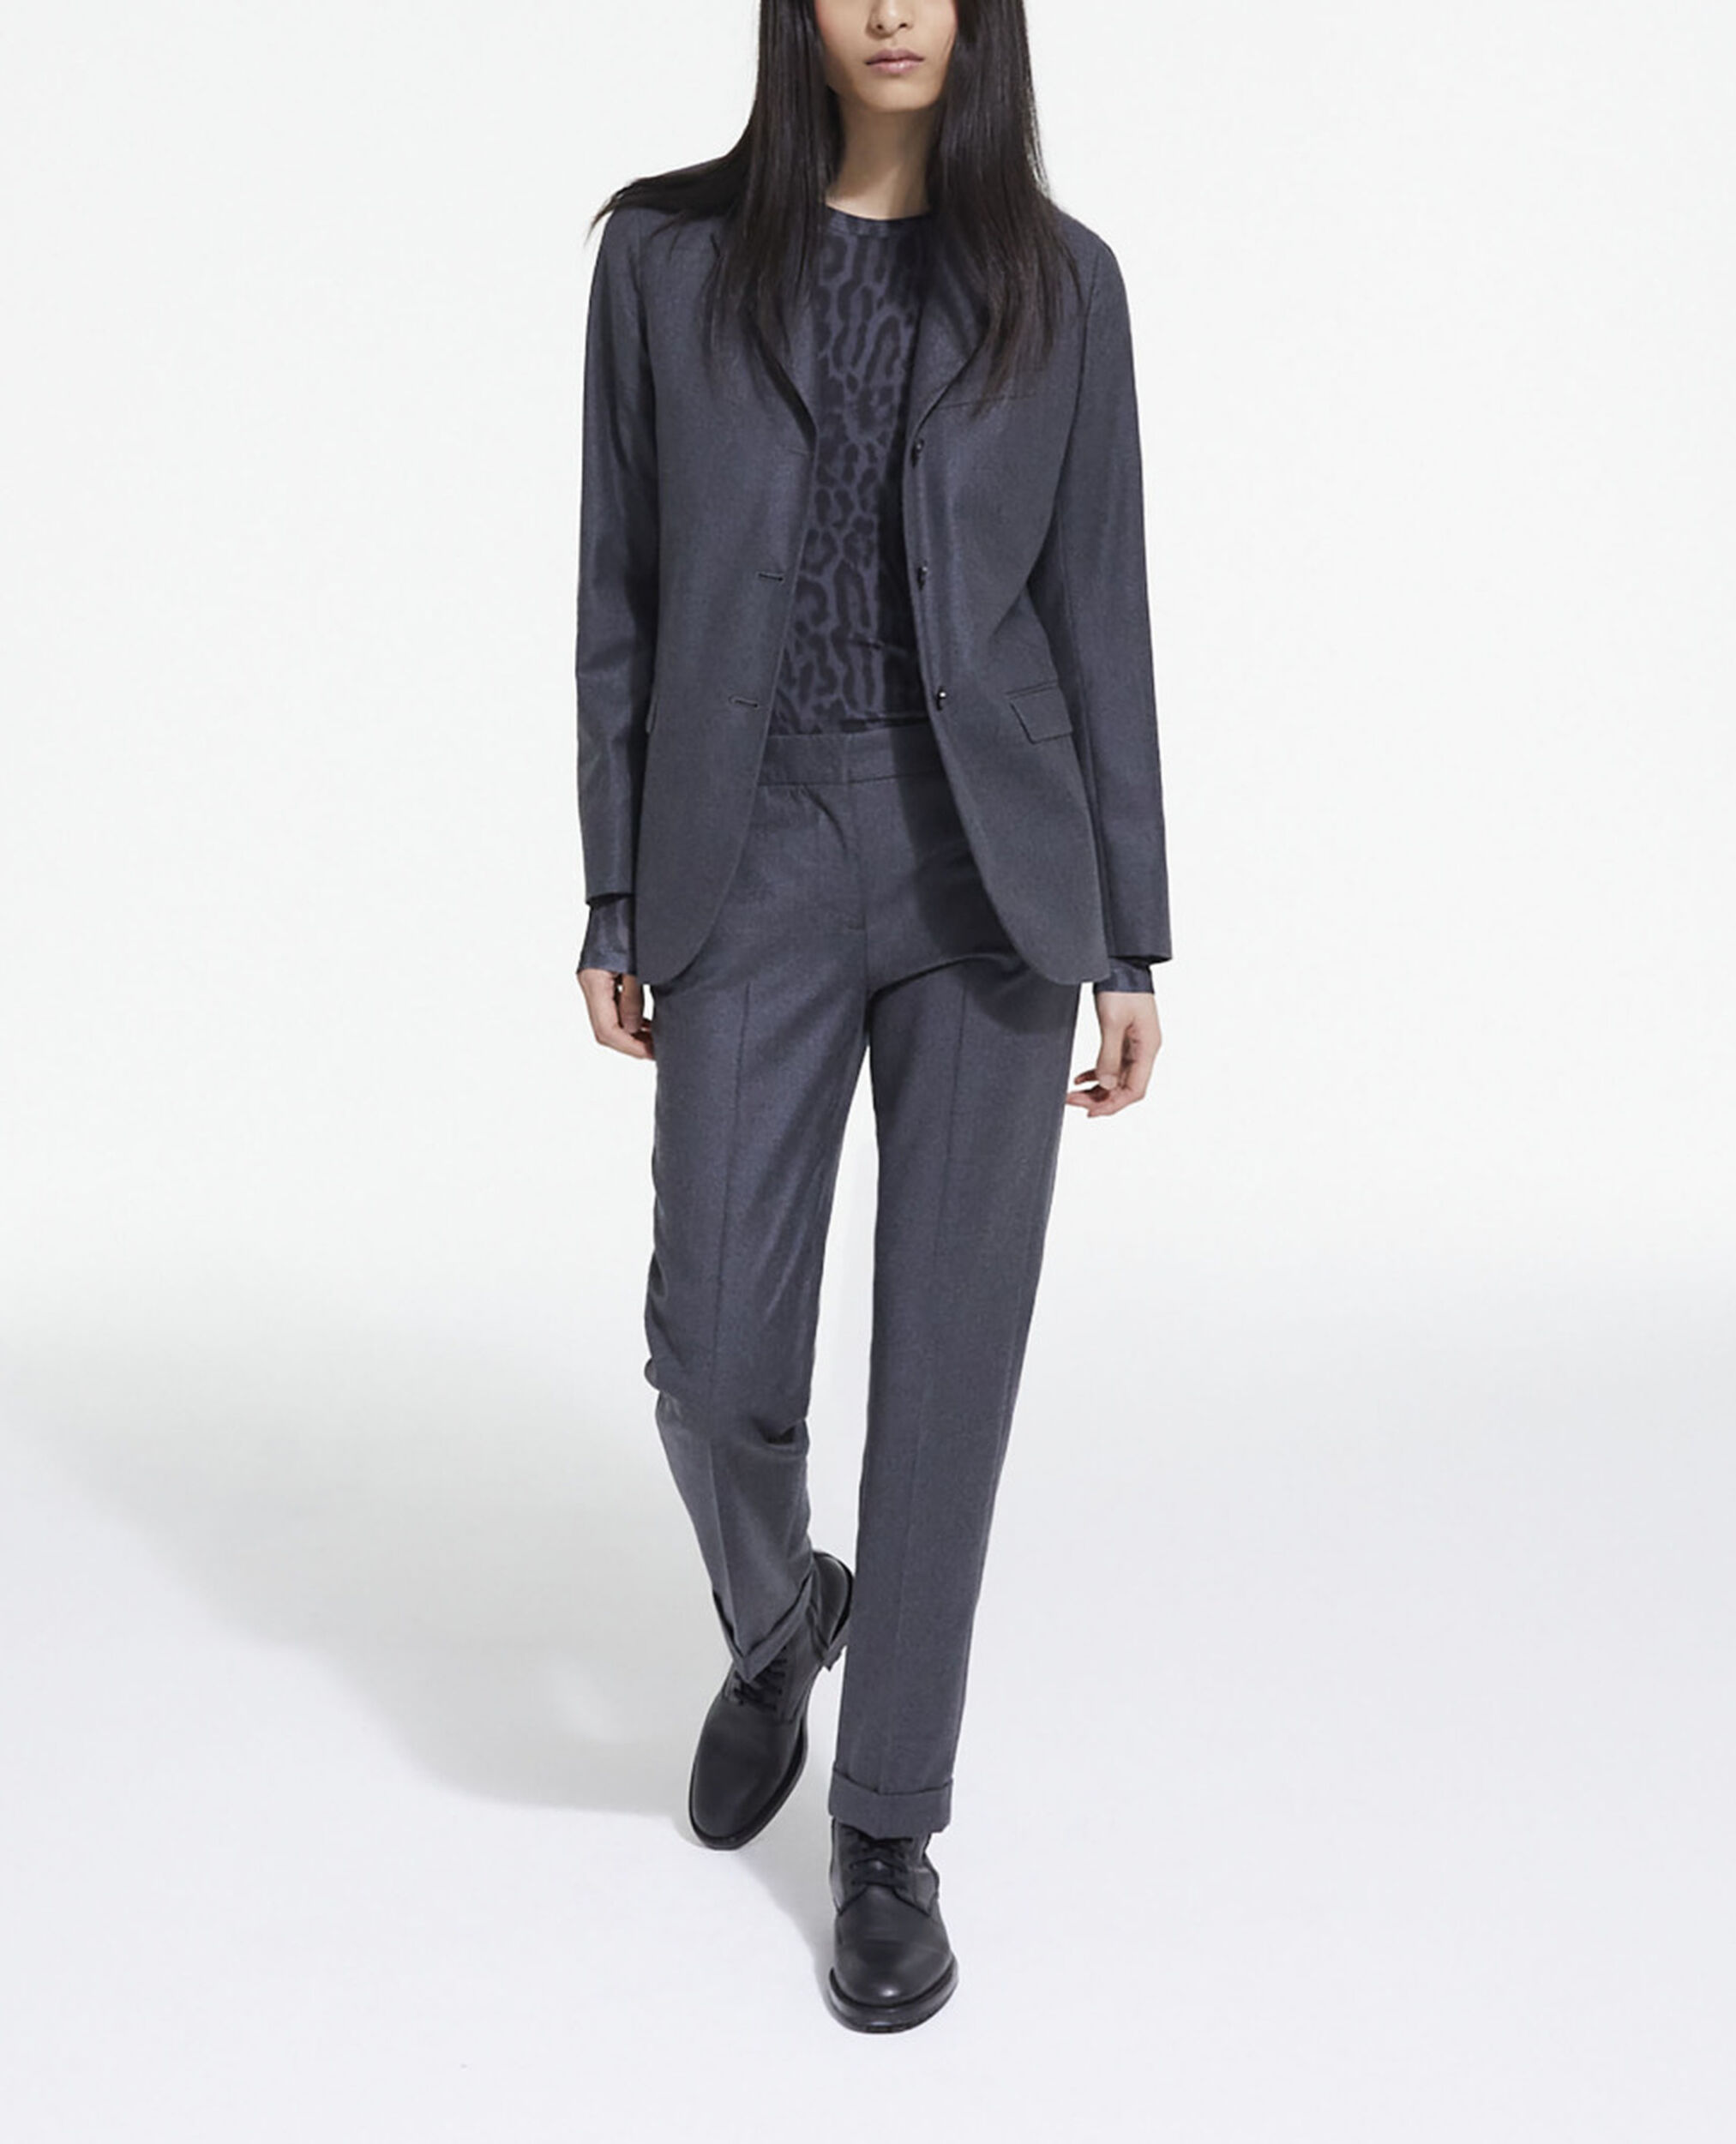 Gray wool suit pants, GREY, hi-res image number null